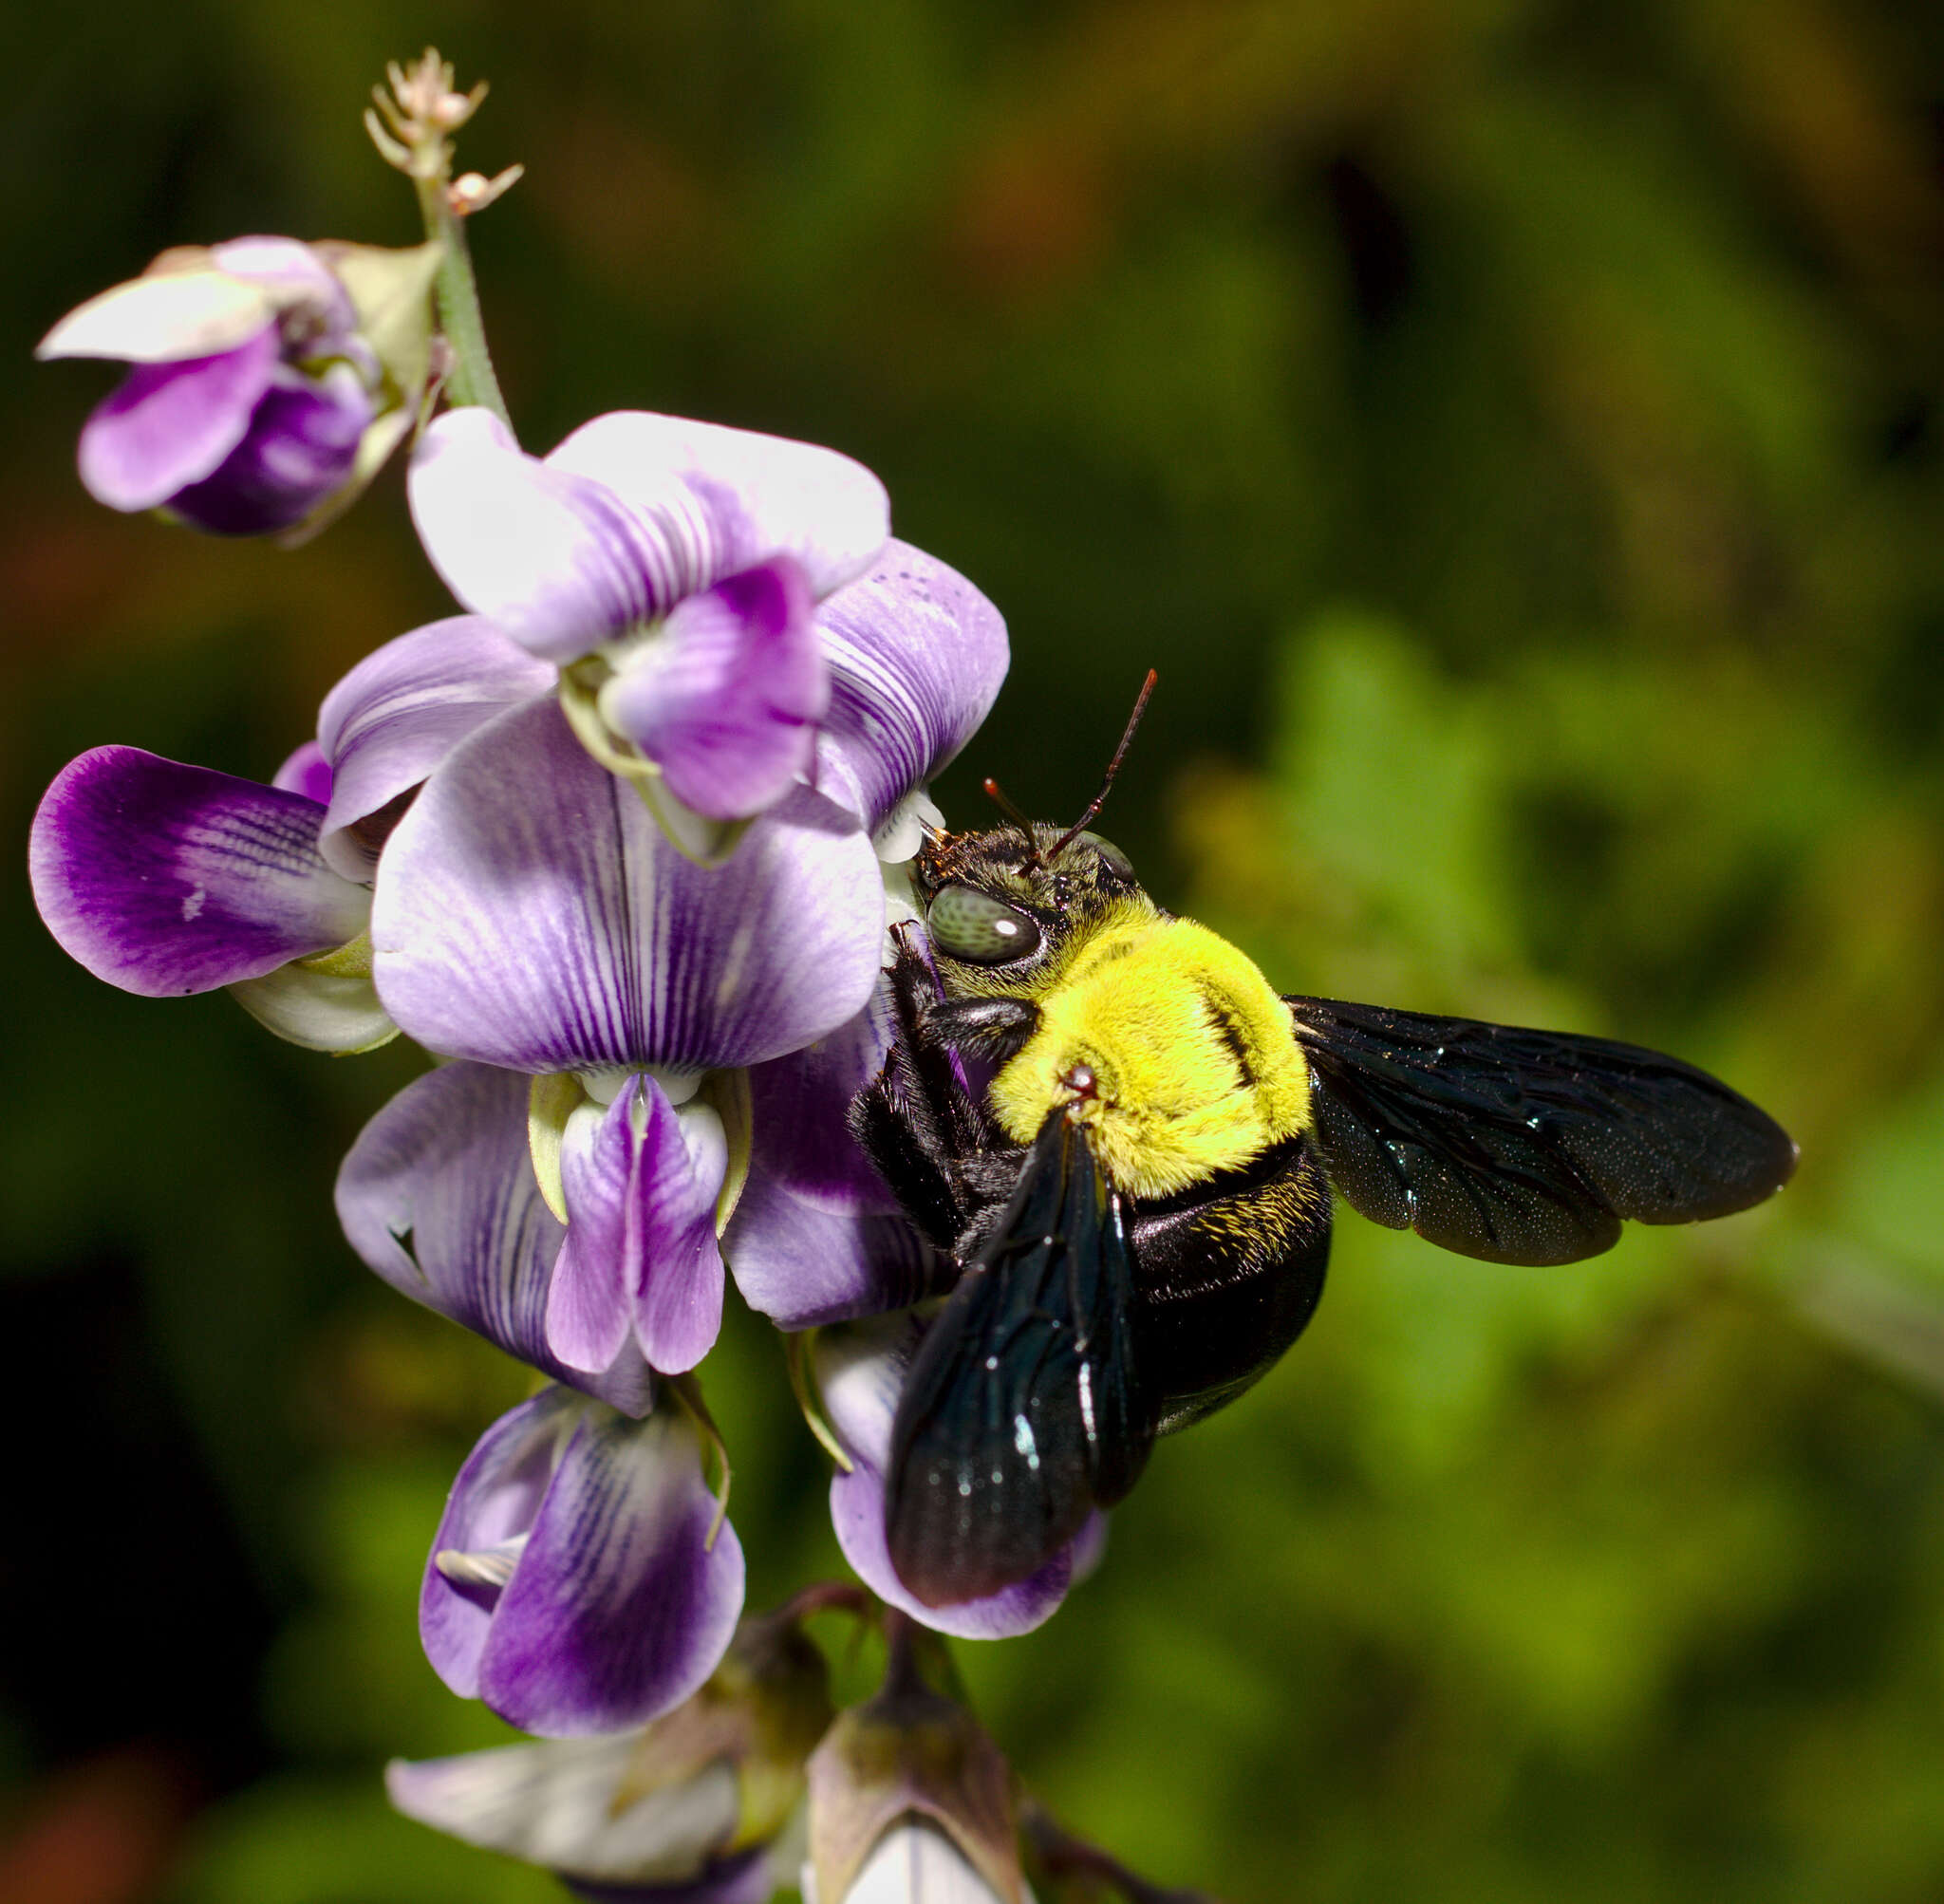 Image of Xylocopa ruficornis Fabricius 1804